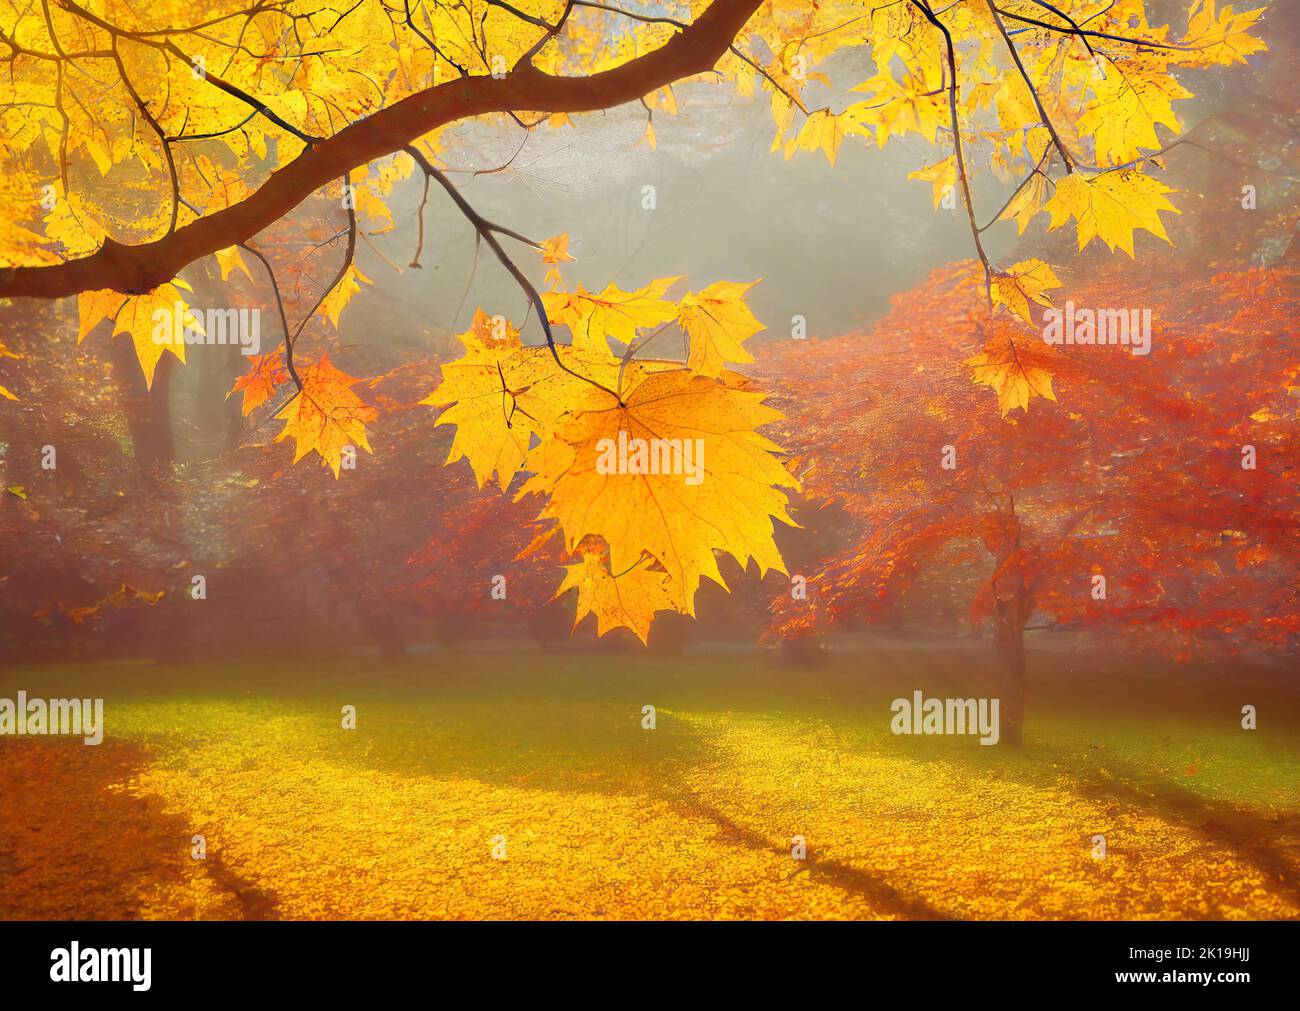 Maple tree branch with yellow autumn leaves, fall in a park, sunny day. Digital illustration based on render by neural network Stock Photo